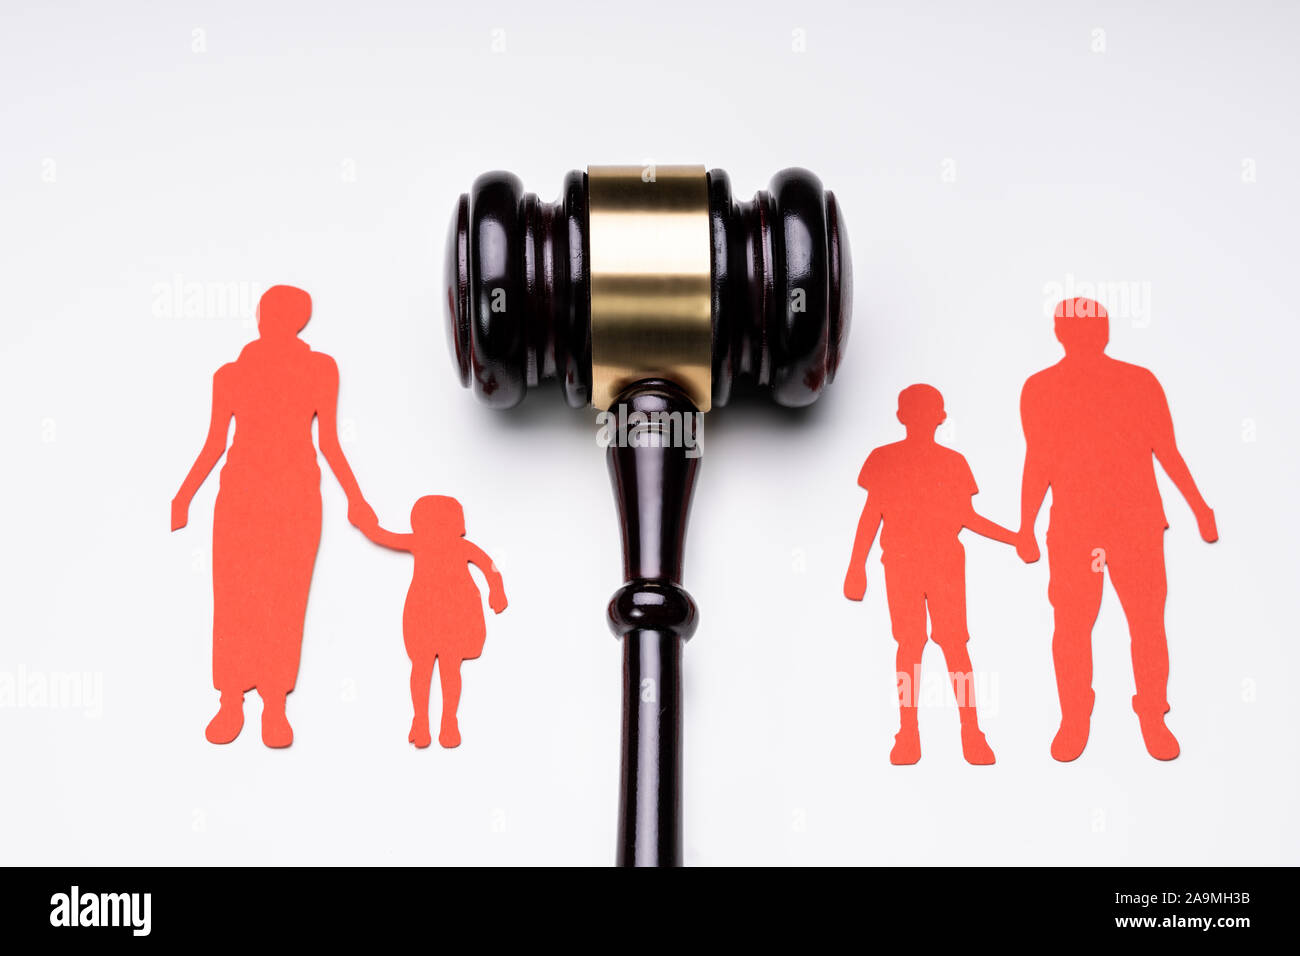 Separated Family Figure Paper Cutout And Judge Gavel Over White Surface Stock Photo